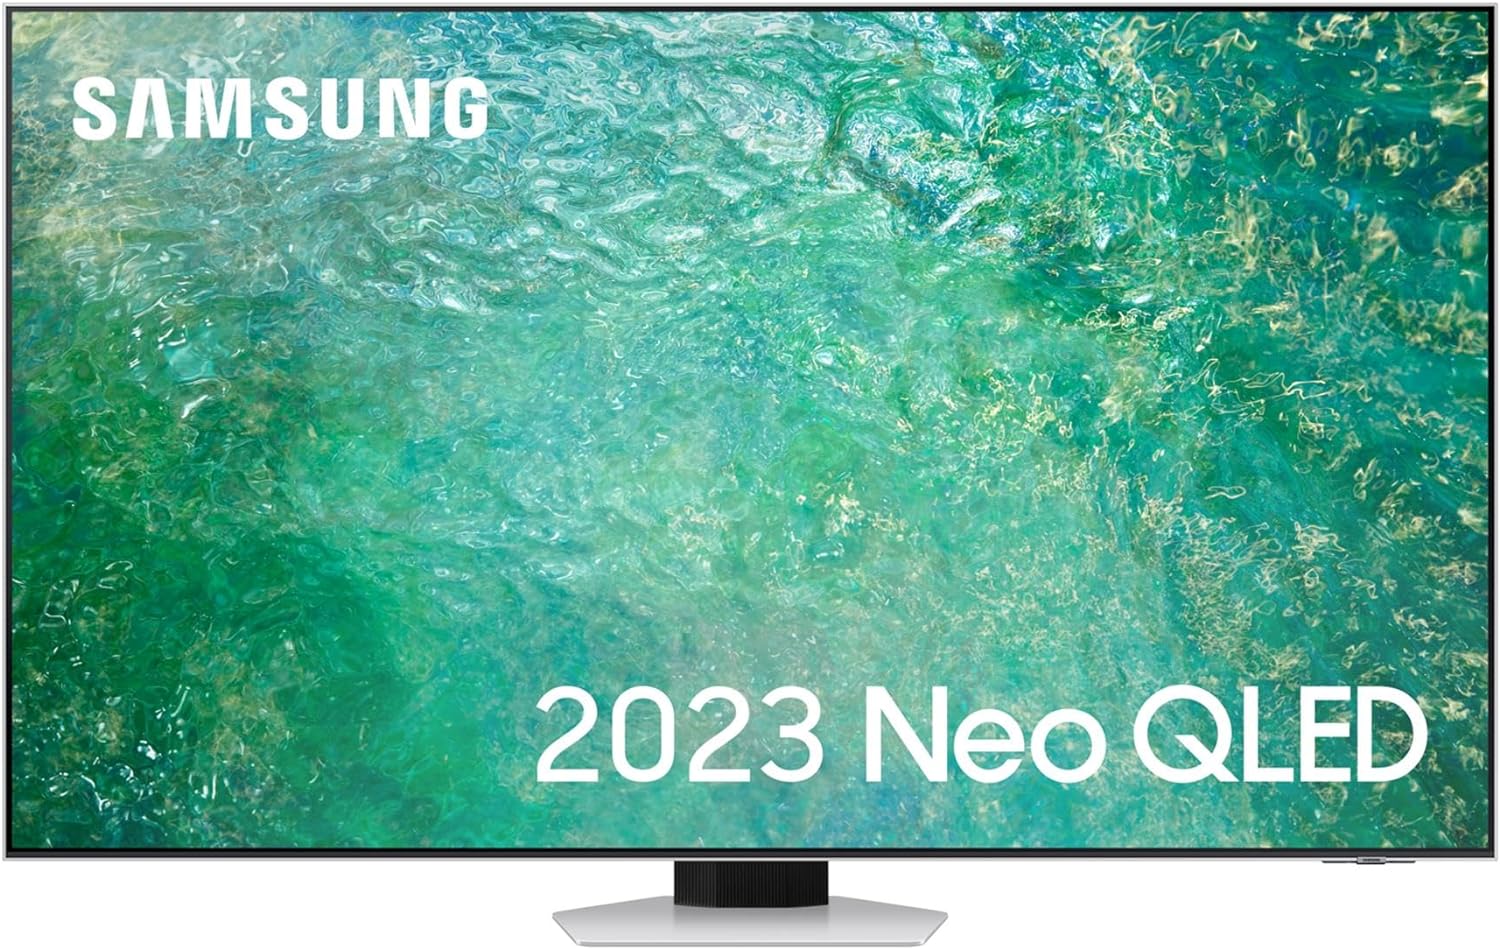 Samsung 55 Inch QN85C 4K Neo QLED HDR Smart TV (2023) - Quantum Matrix Technology With 100% Colour Volume & Alexa Built In, Object Tracking Dolby Atmos, Gaming Hub, Wide Viewing Angle, Multi View - Amazing Gadgets Outlet